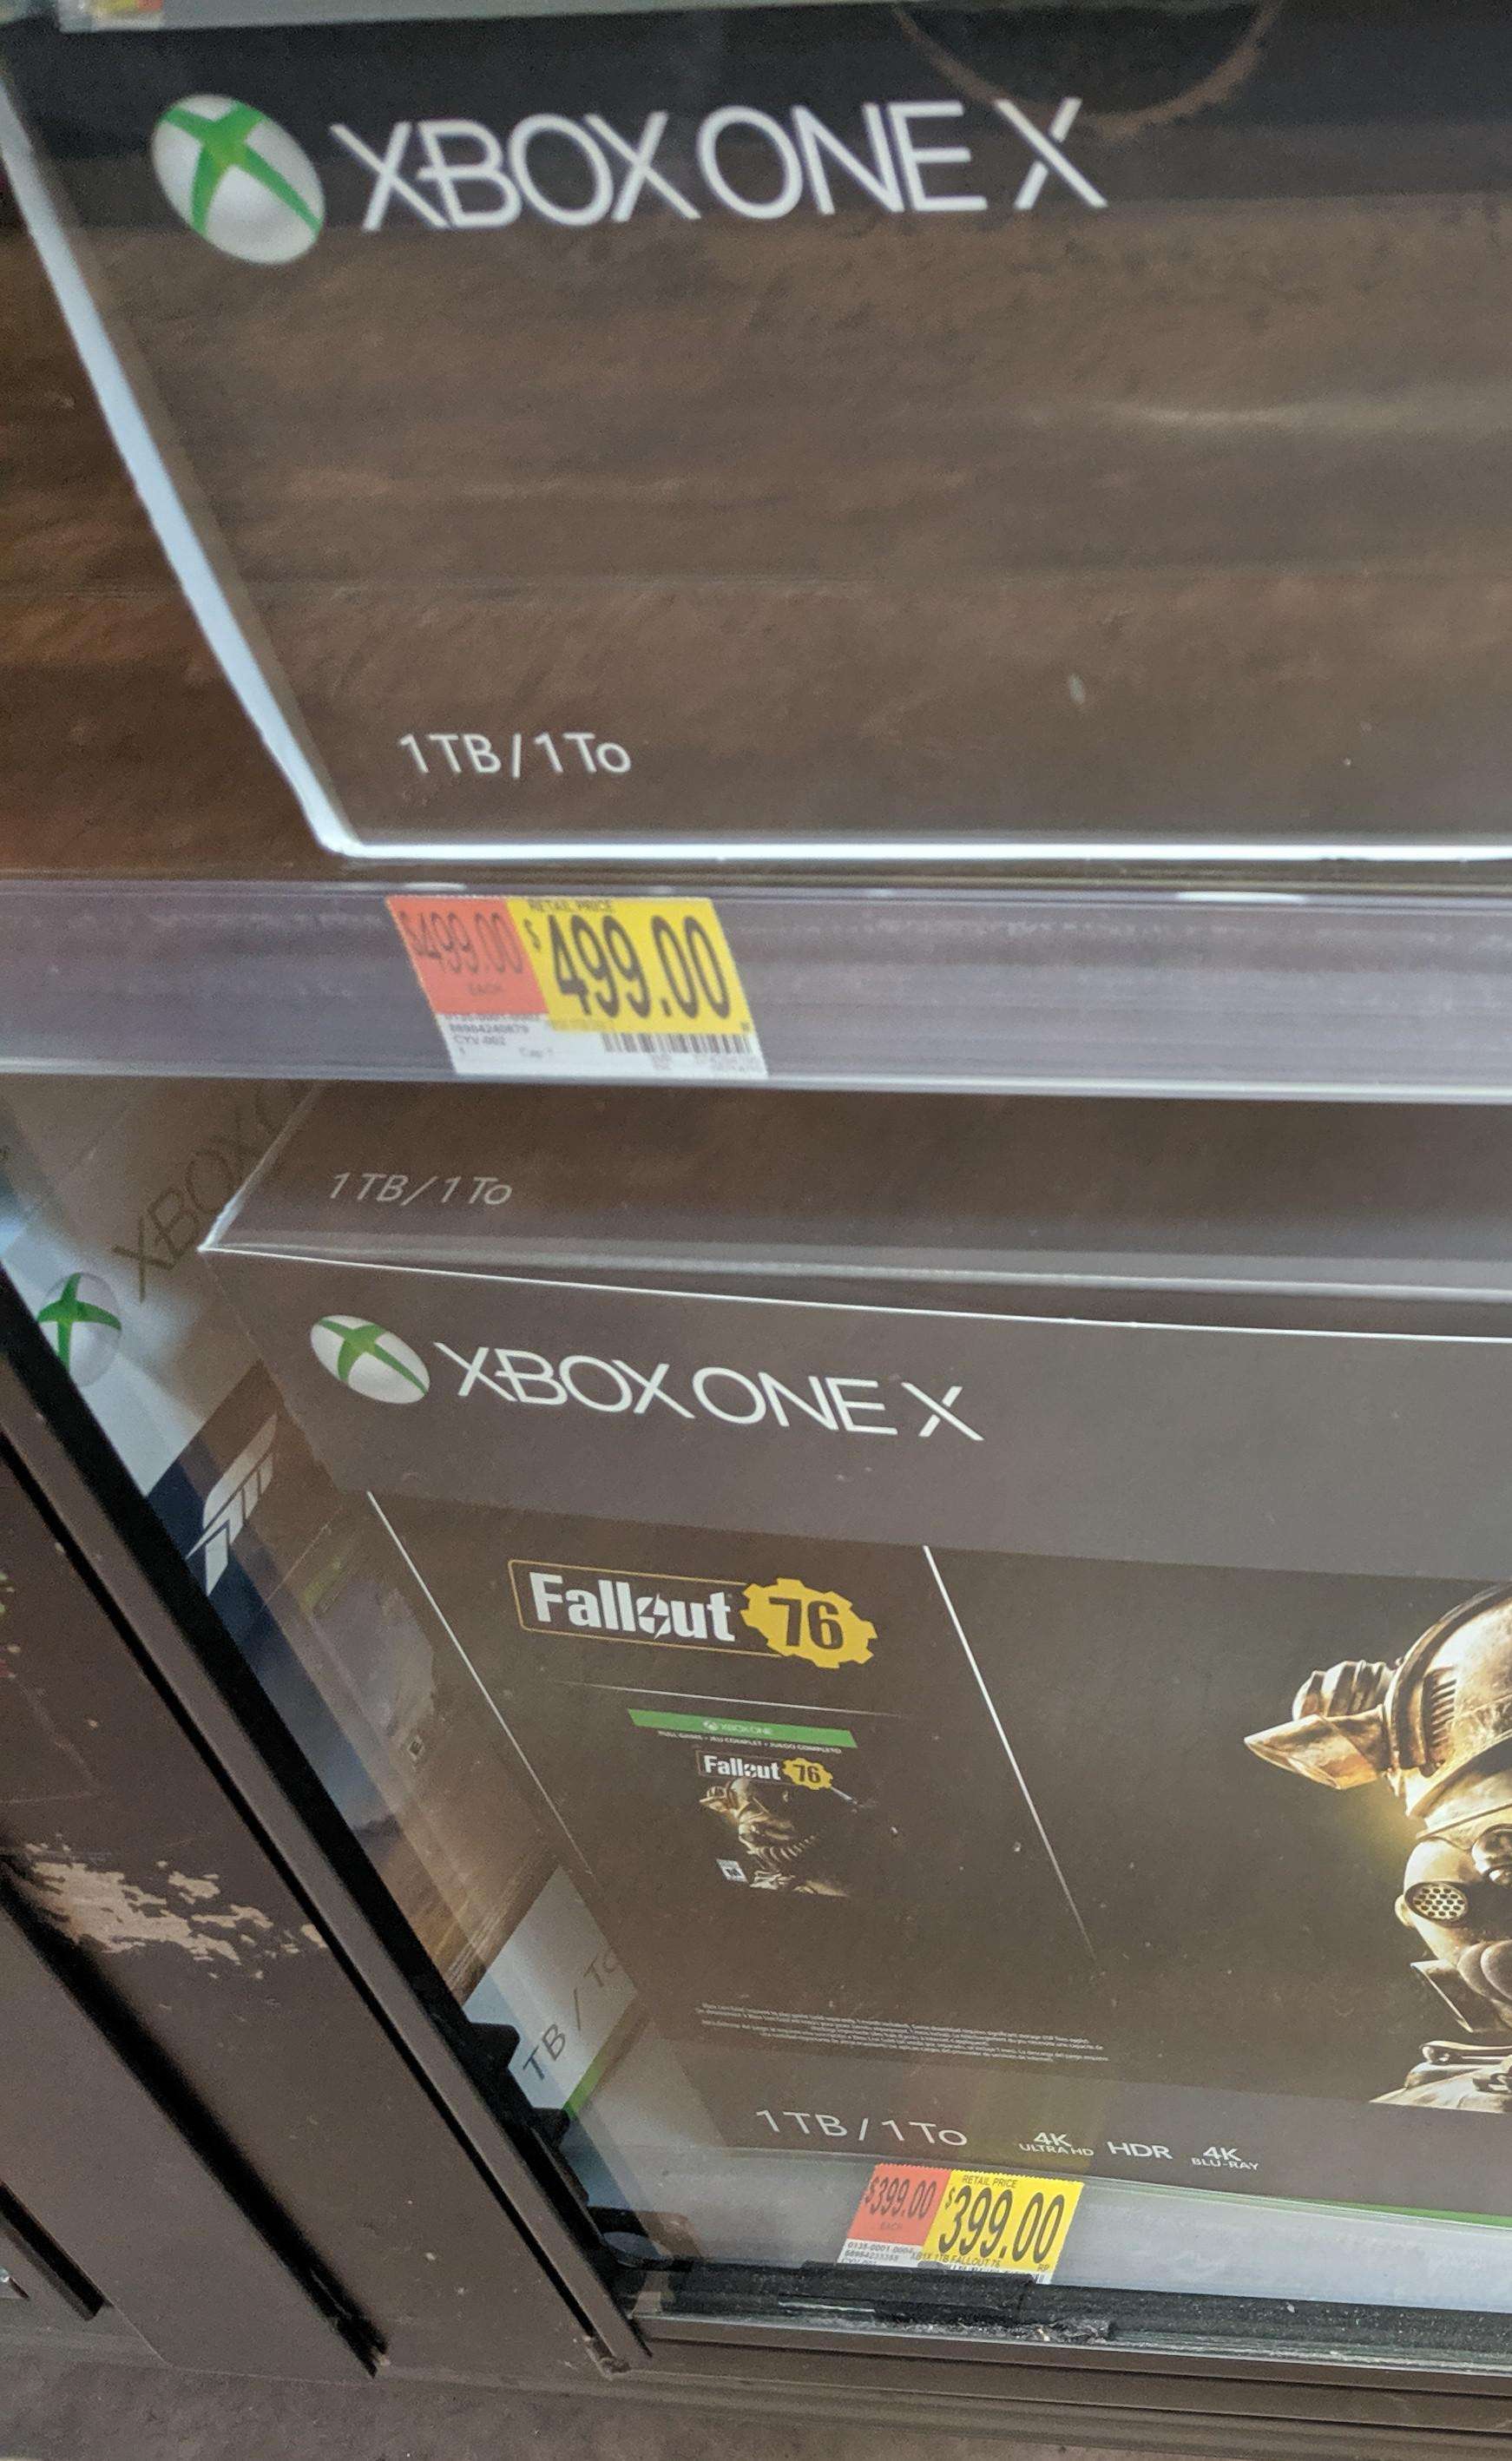 image showing Apparently being bundled with Fallout 76 makes you $100 less valuable.